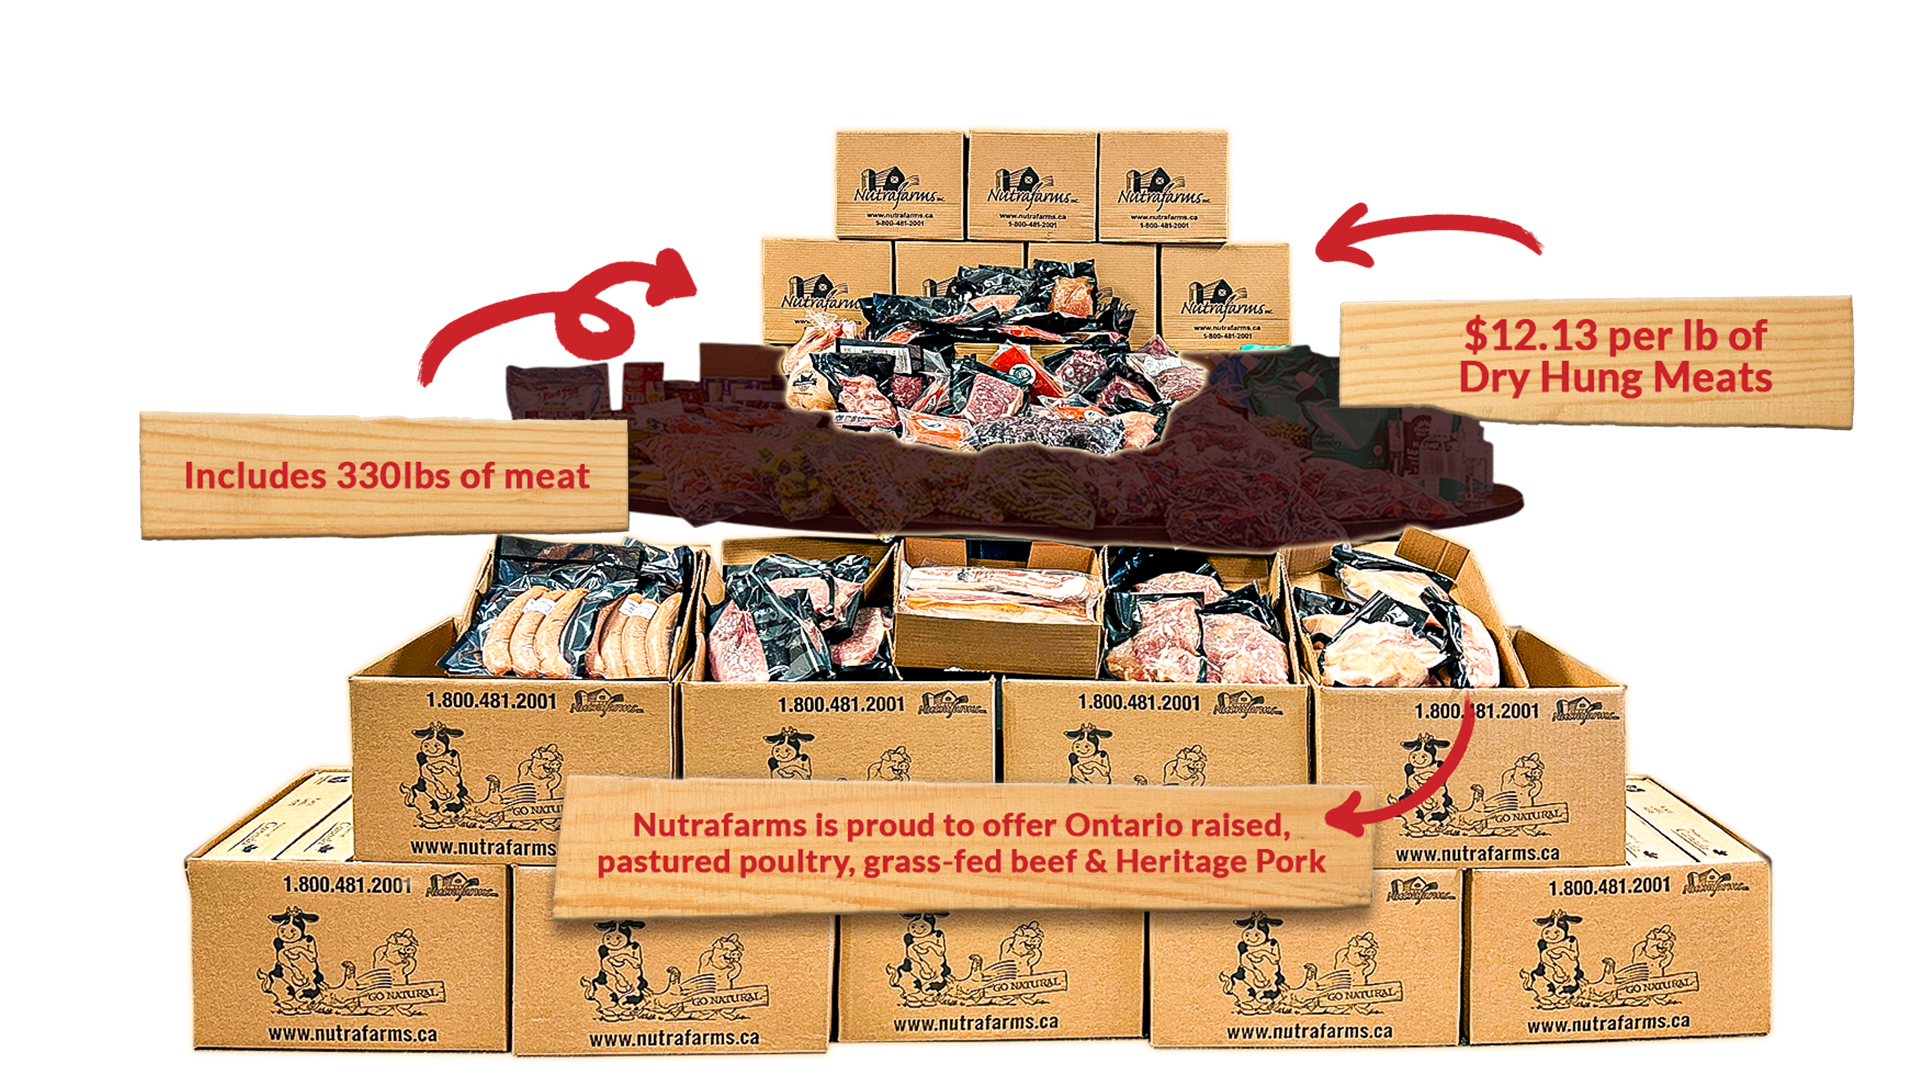 Nutrafarms Affordable Price for Quality Farm Products - Nutrafarms Pricing - Meat Fish & Poultry